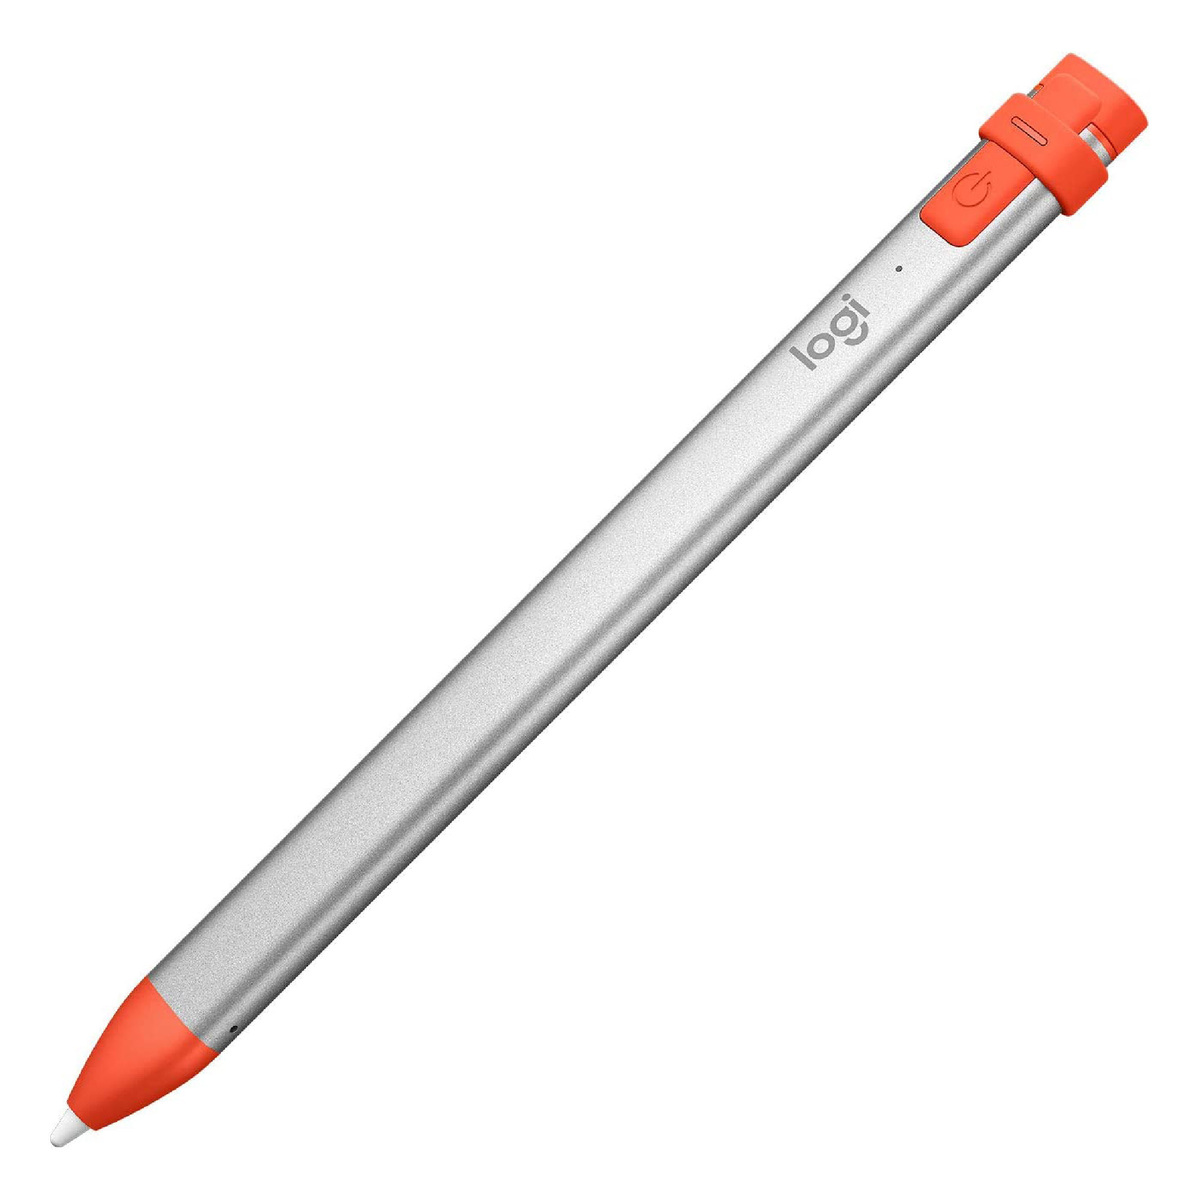 Logitech Crayon Digital Pencil for All iPads with Apple Pencil Technology, Anti-roll Design, and Dynamic Smart tip